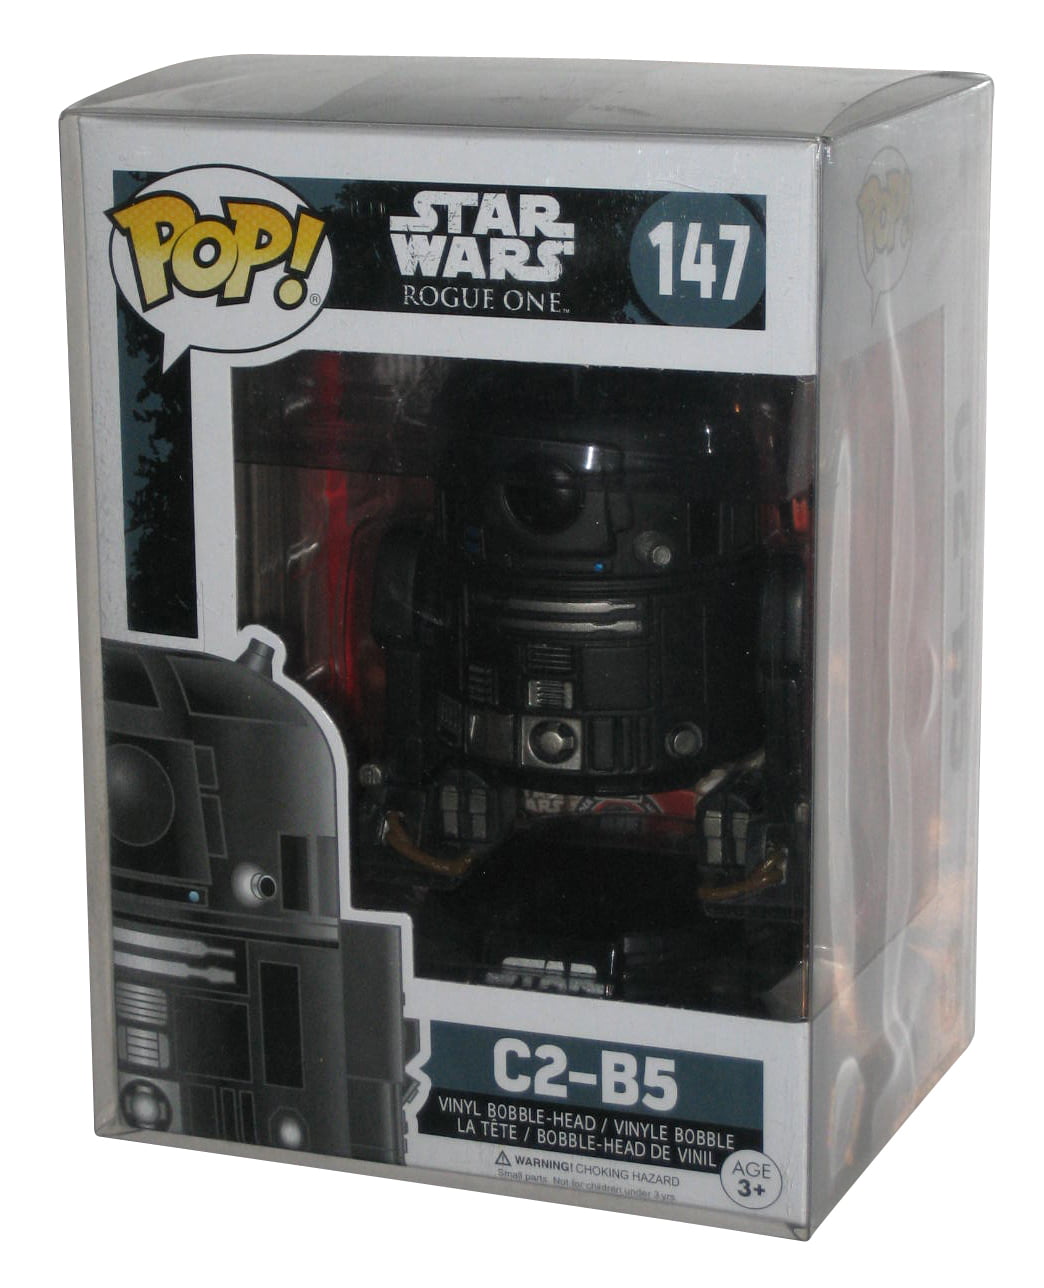 FUNKO Pop Star Wars Rogue One C2-B5 Action Figure for sale online 